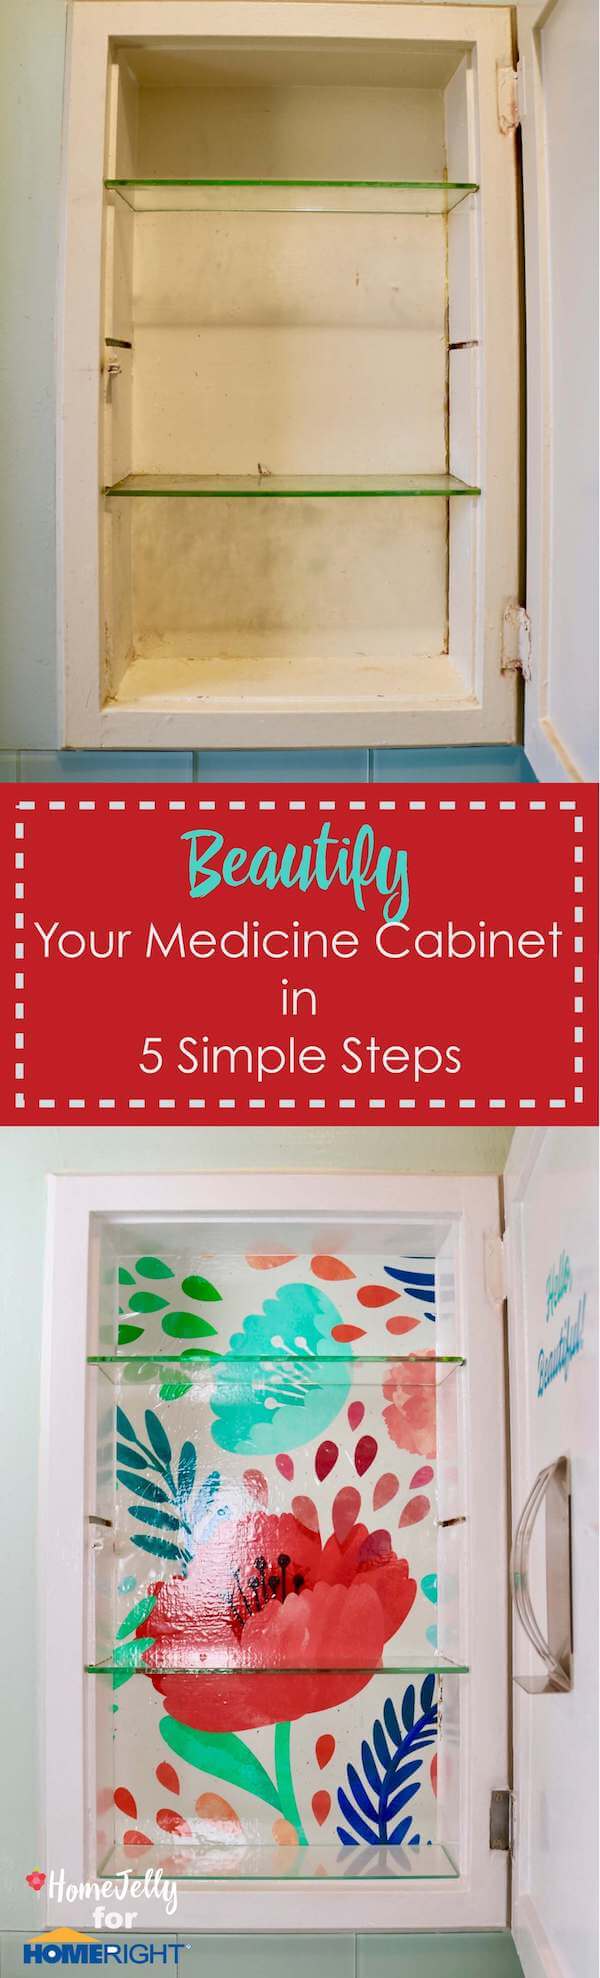 Beautify your medicine cabinet in 5 simple steps